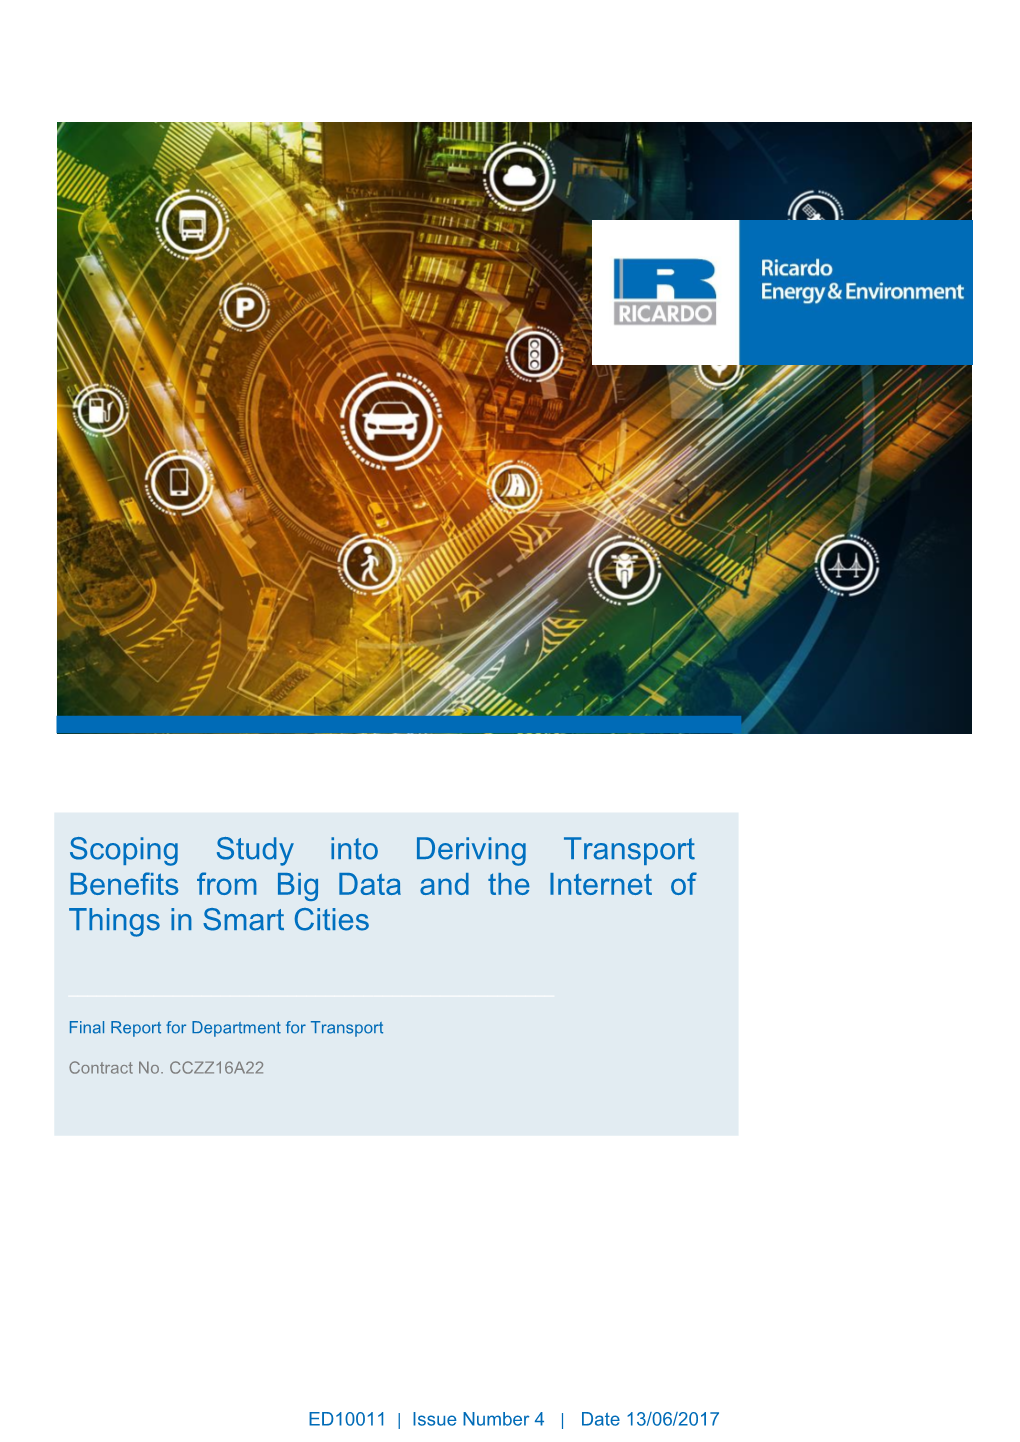 Scoping Study Into Deriving Transport Benefits from Big Data and the Internet of Things in Smart Cities